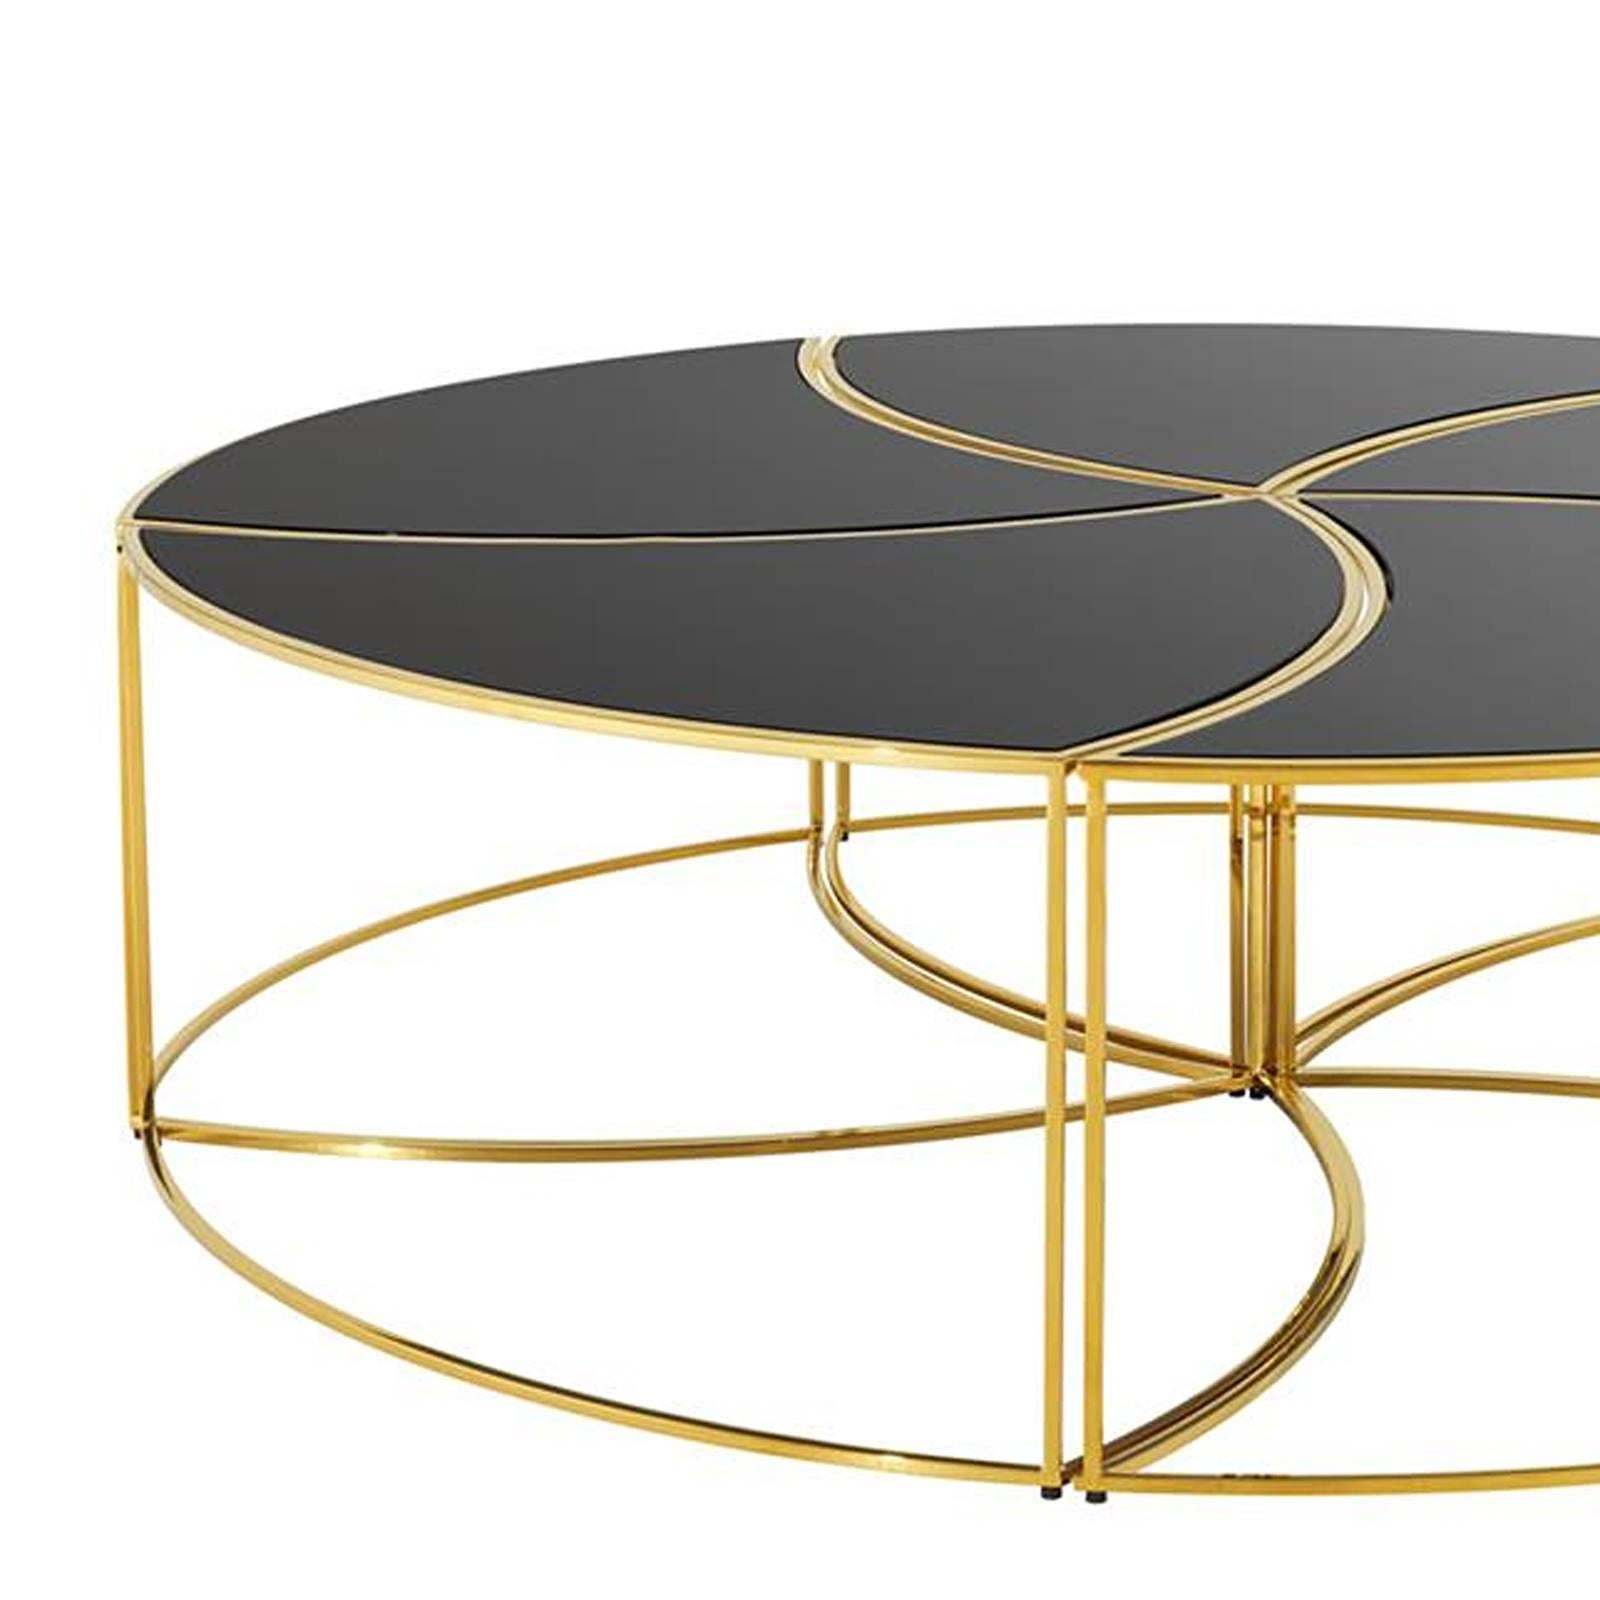 Coffee table Helix set of five with structure in
gold finish and black glass top. Set of five small
table. 